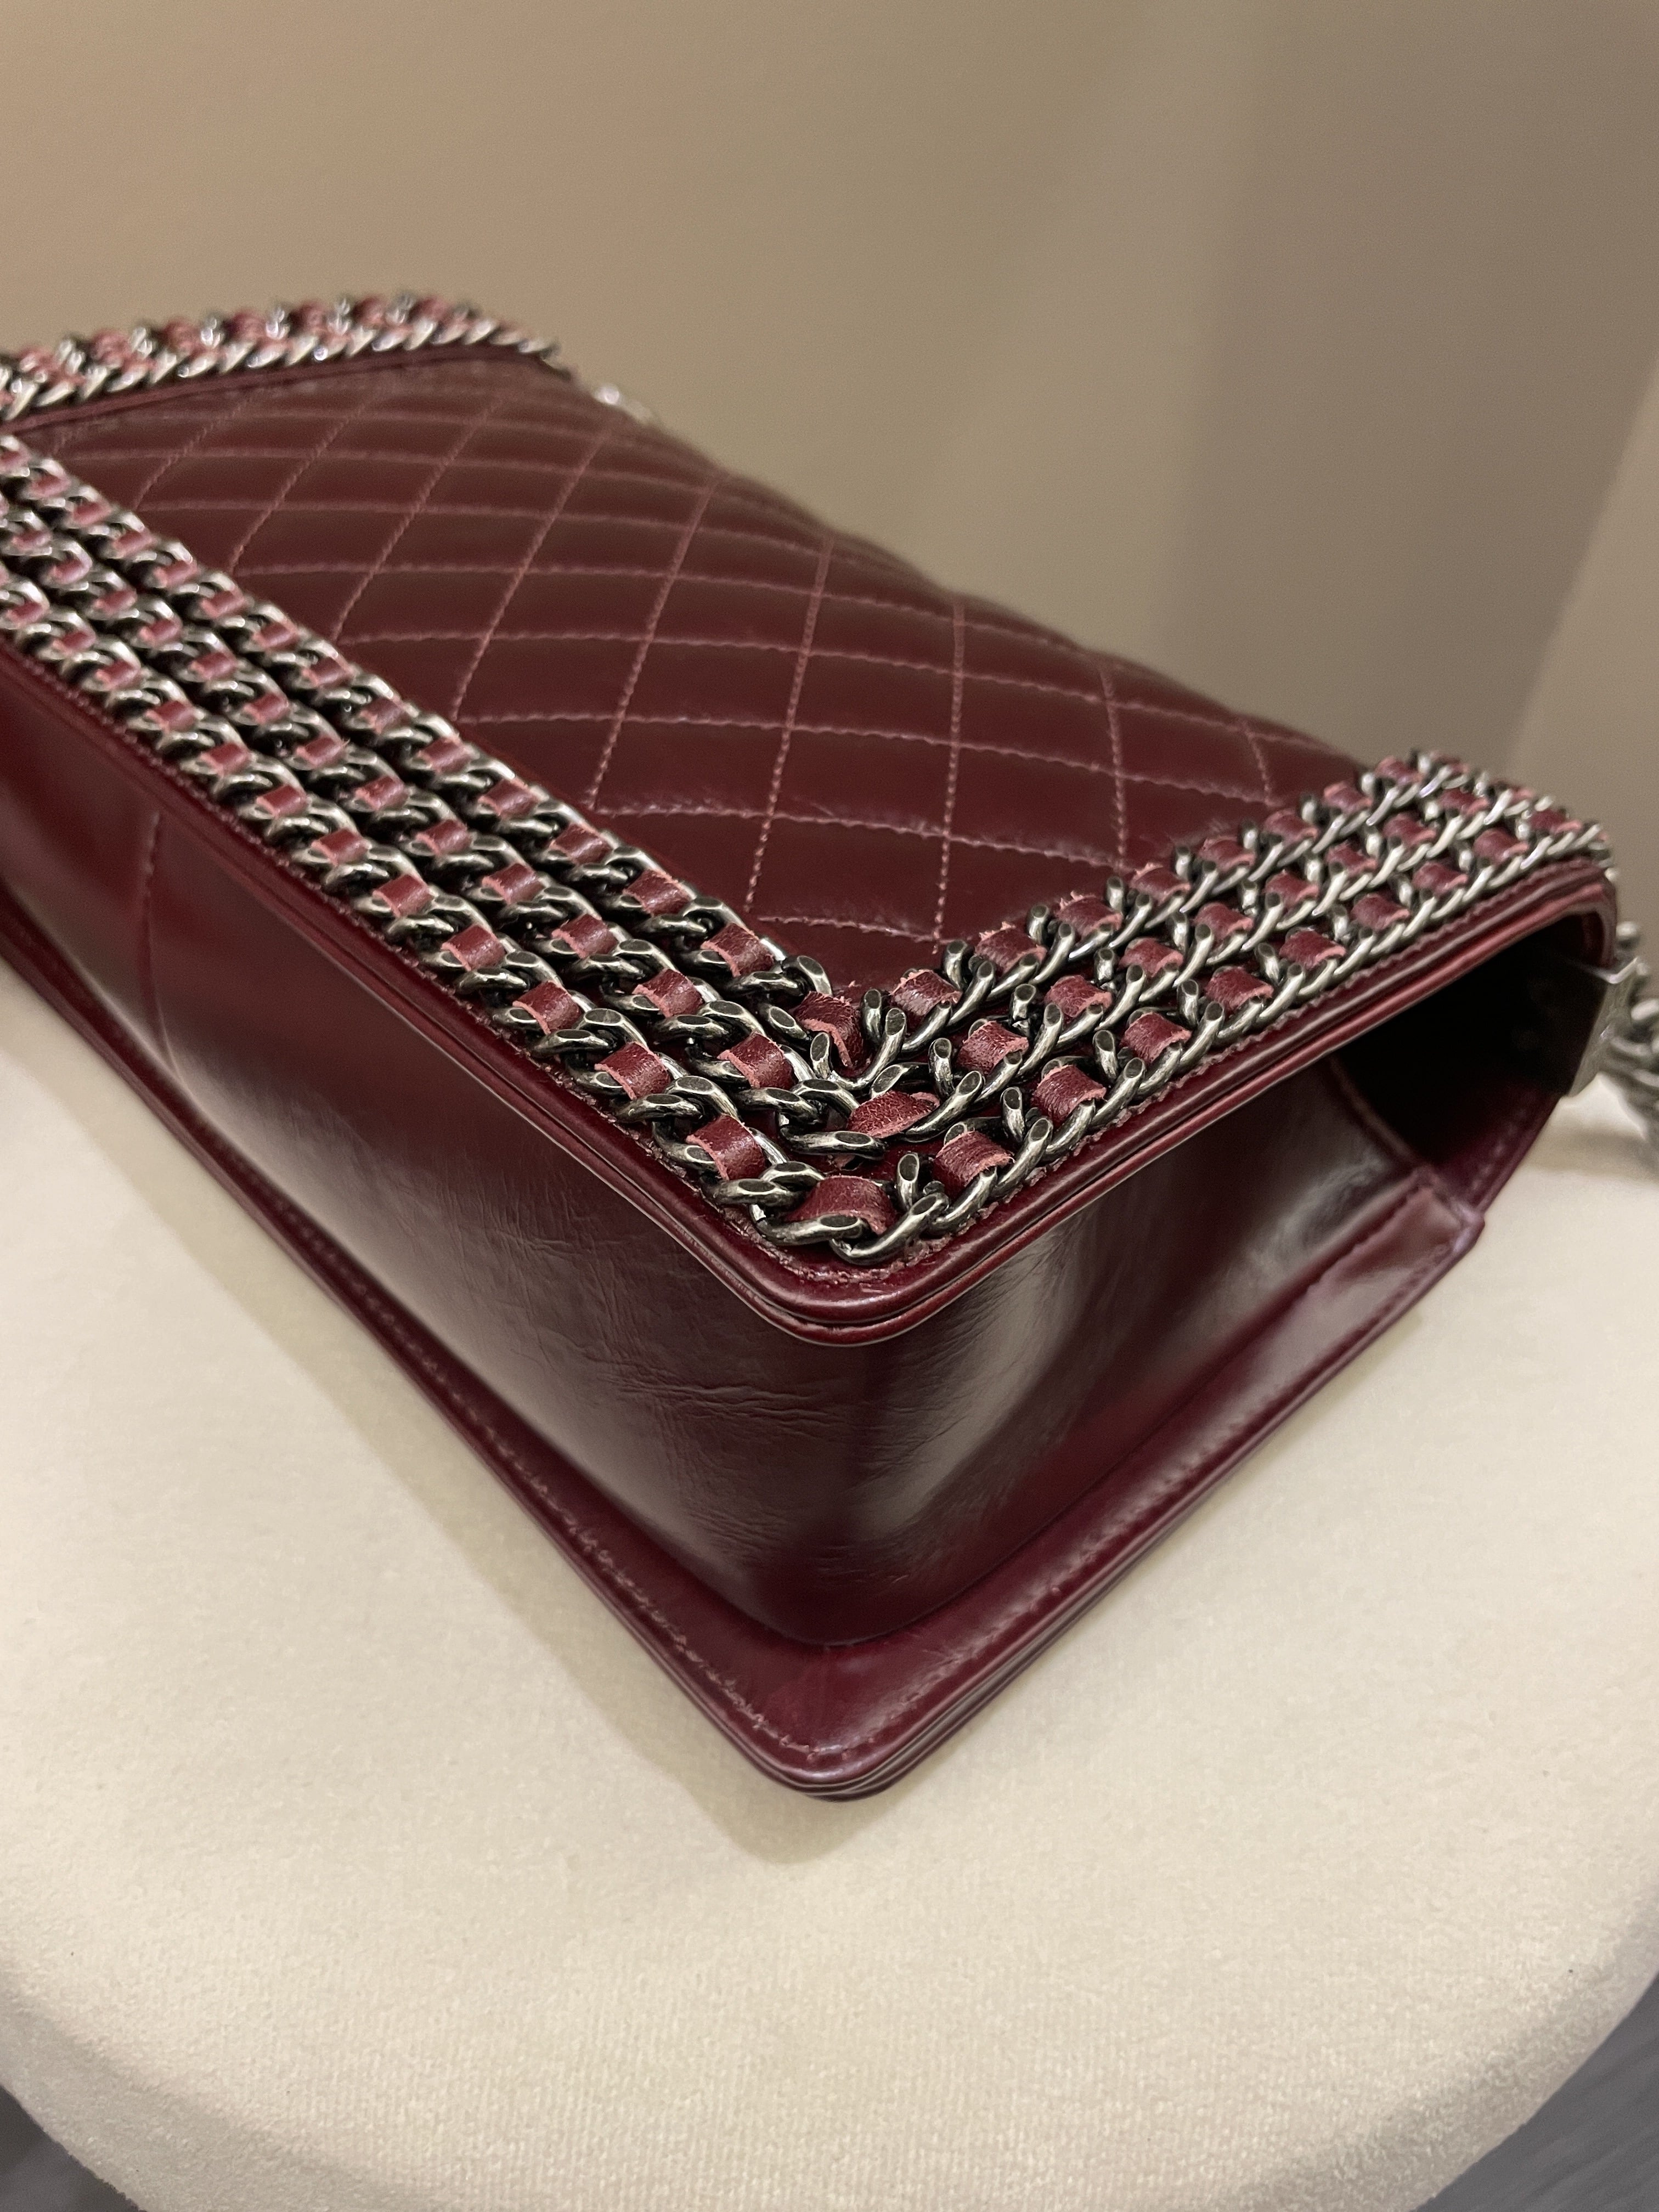 Chanel Quilted Old Medium Chained Boy Bag Burgundy Aged Calfskin